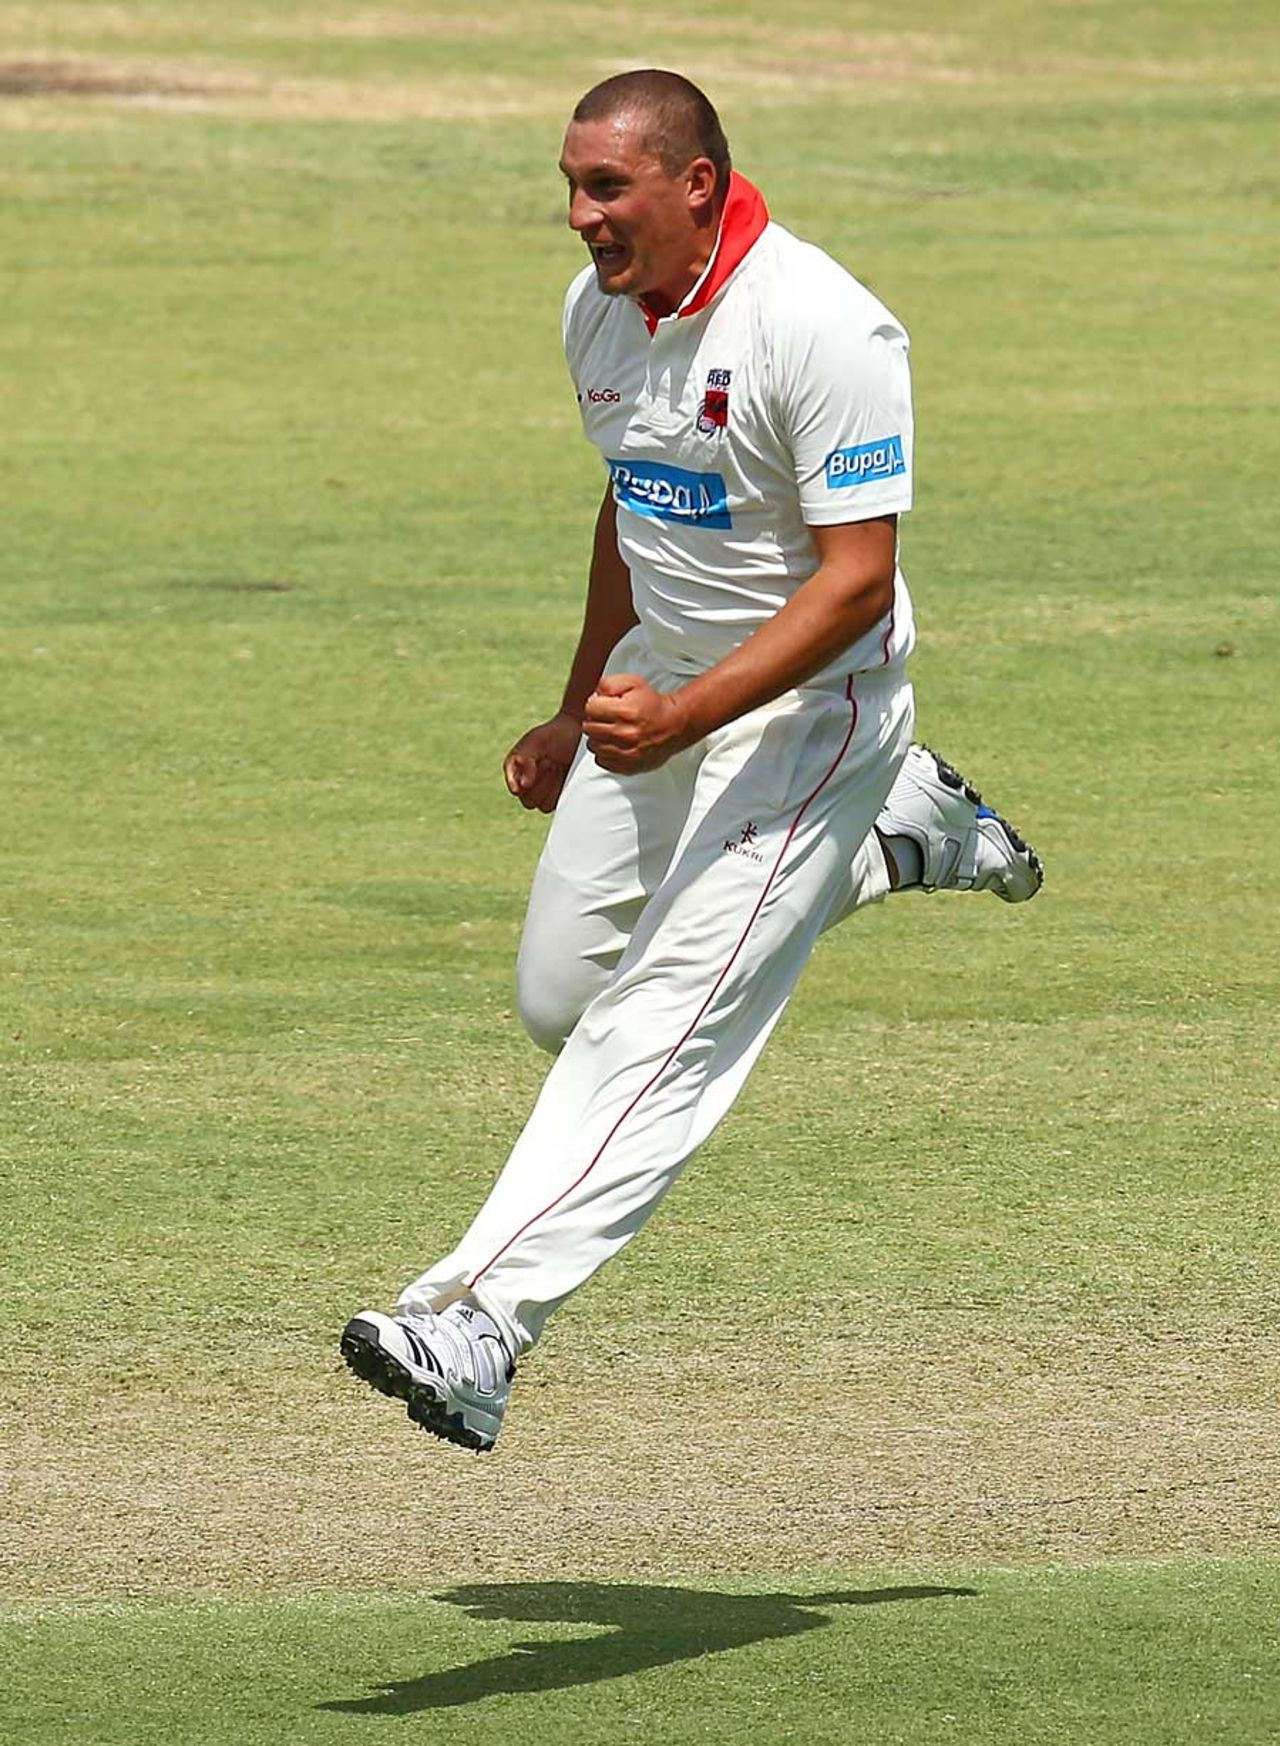 Trent Lawford marked his debut with two wickets, Western Australia v South Australia, Sheffield Shield, Perth, 2nd day, November 7, 2013